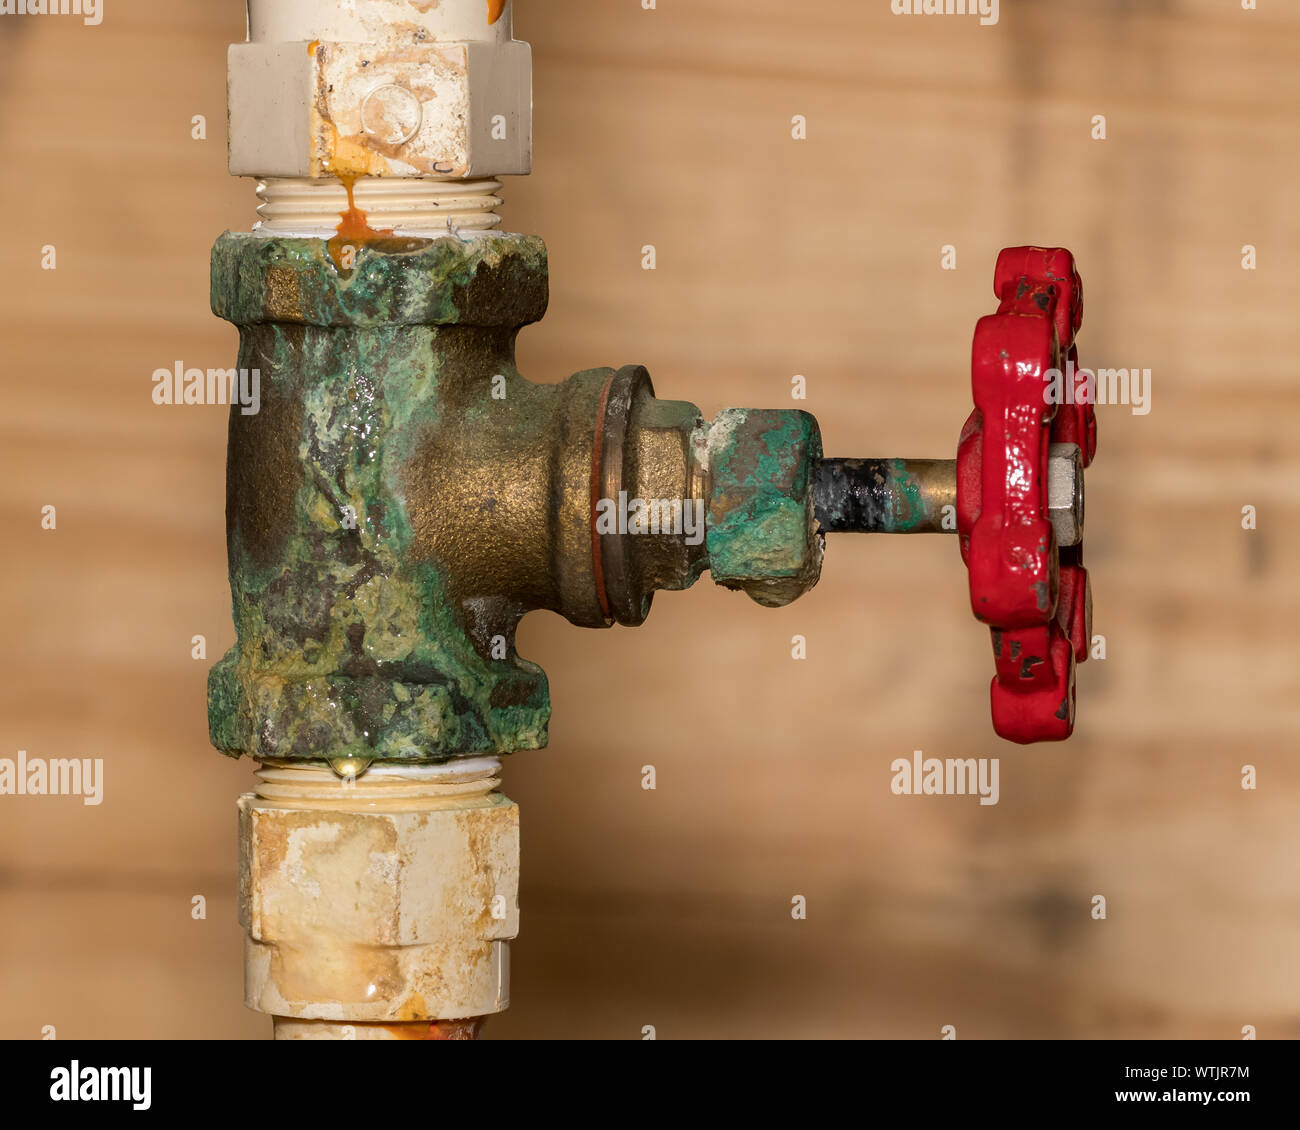 PVC plastic plumbing pipe with brass shutoff valve corroded and leaking water at thread fitting and stem packing Stock Photo